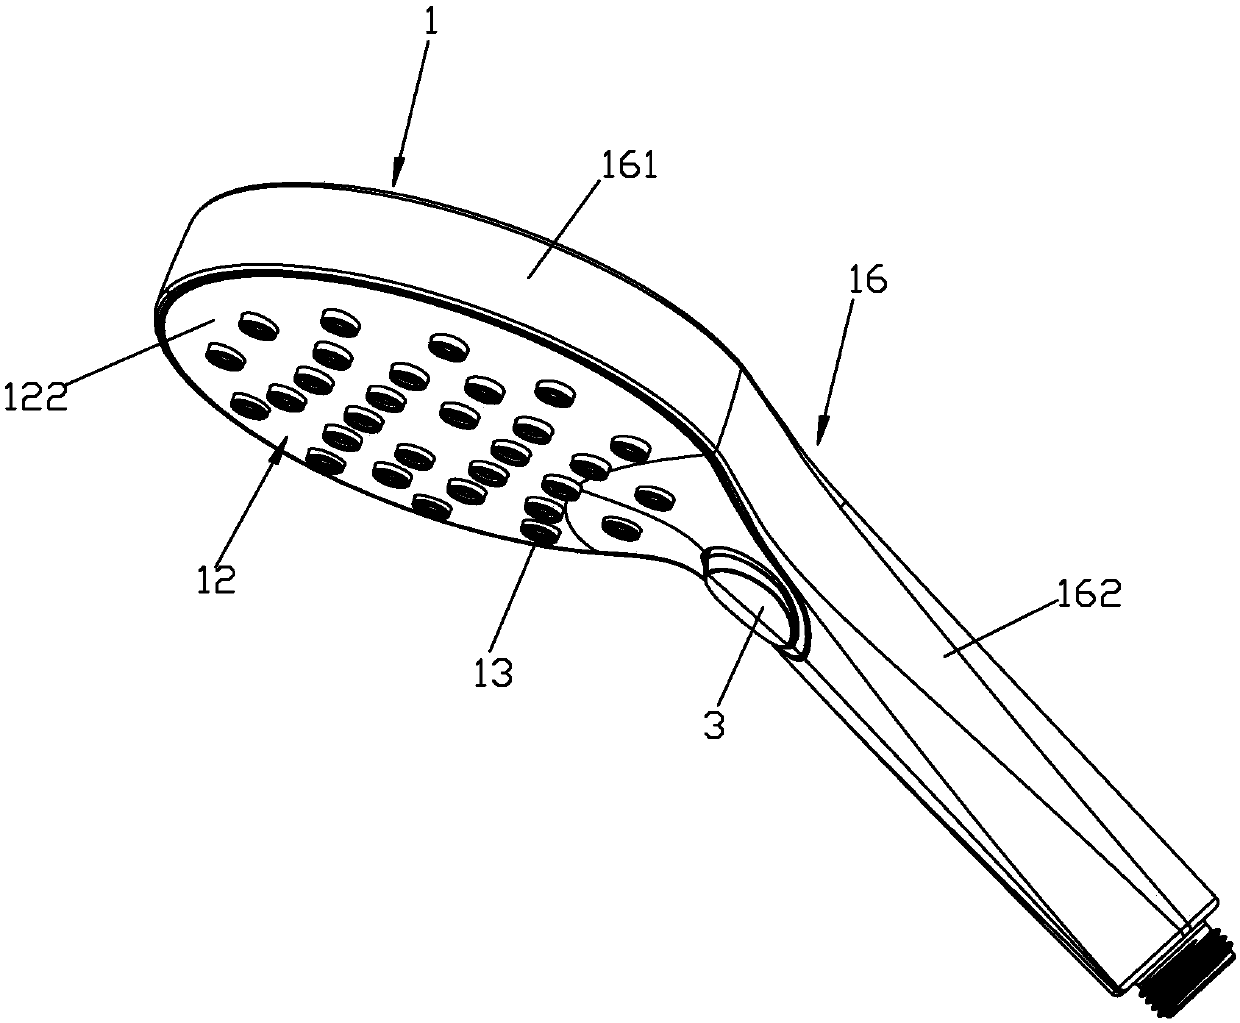 Shower head with same water outlet nozzle capable of discharging different water flowers